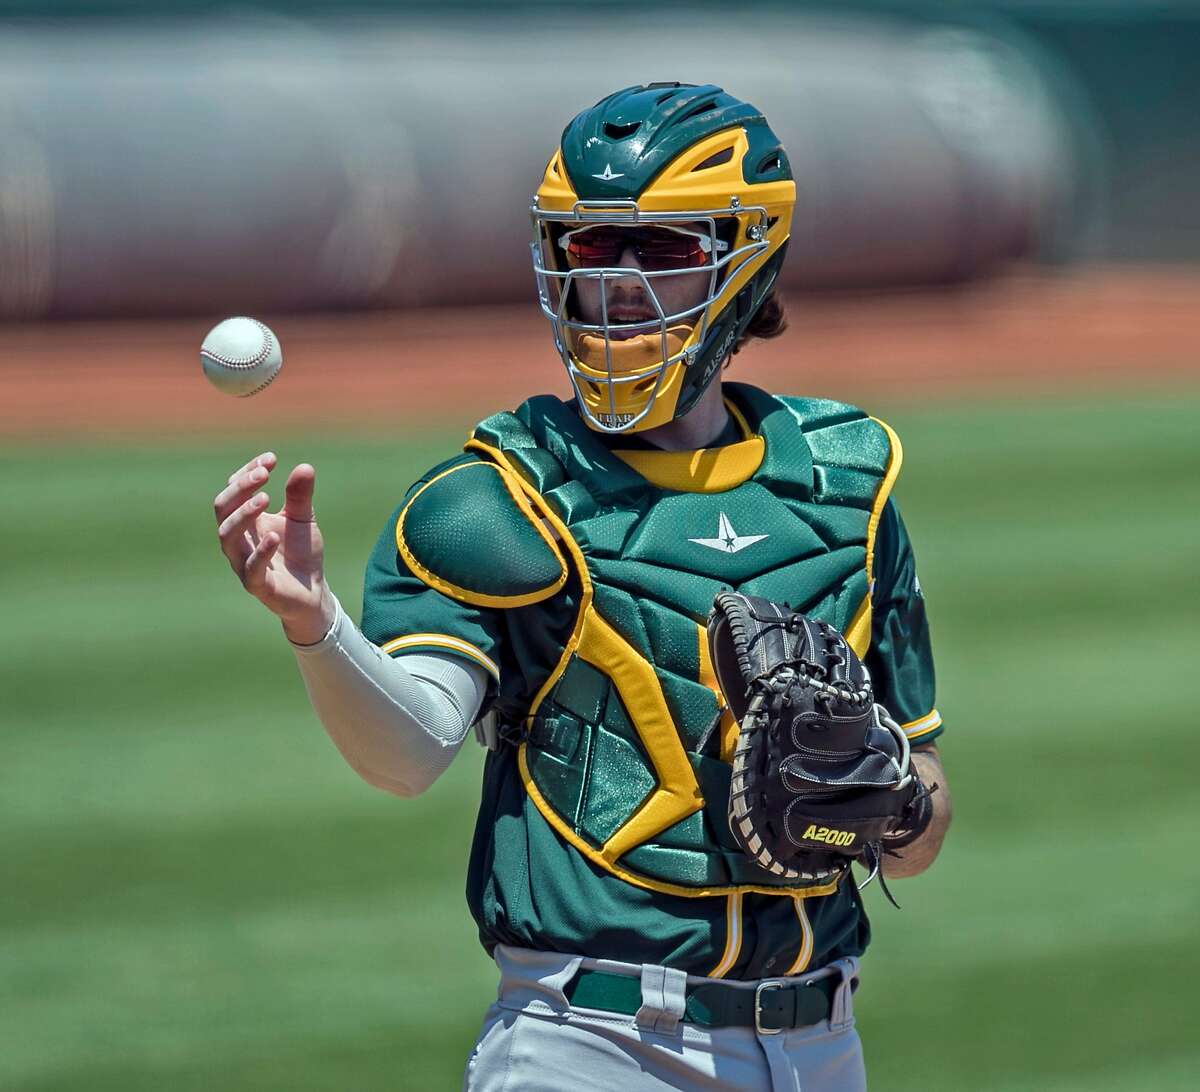 How Jonah Heim is flourishing in his role as the primary catcher